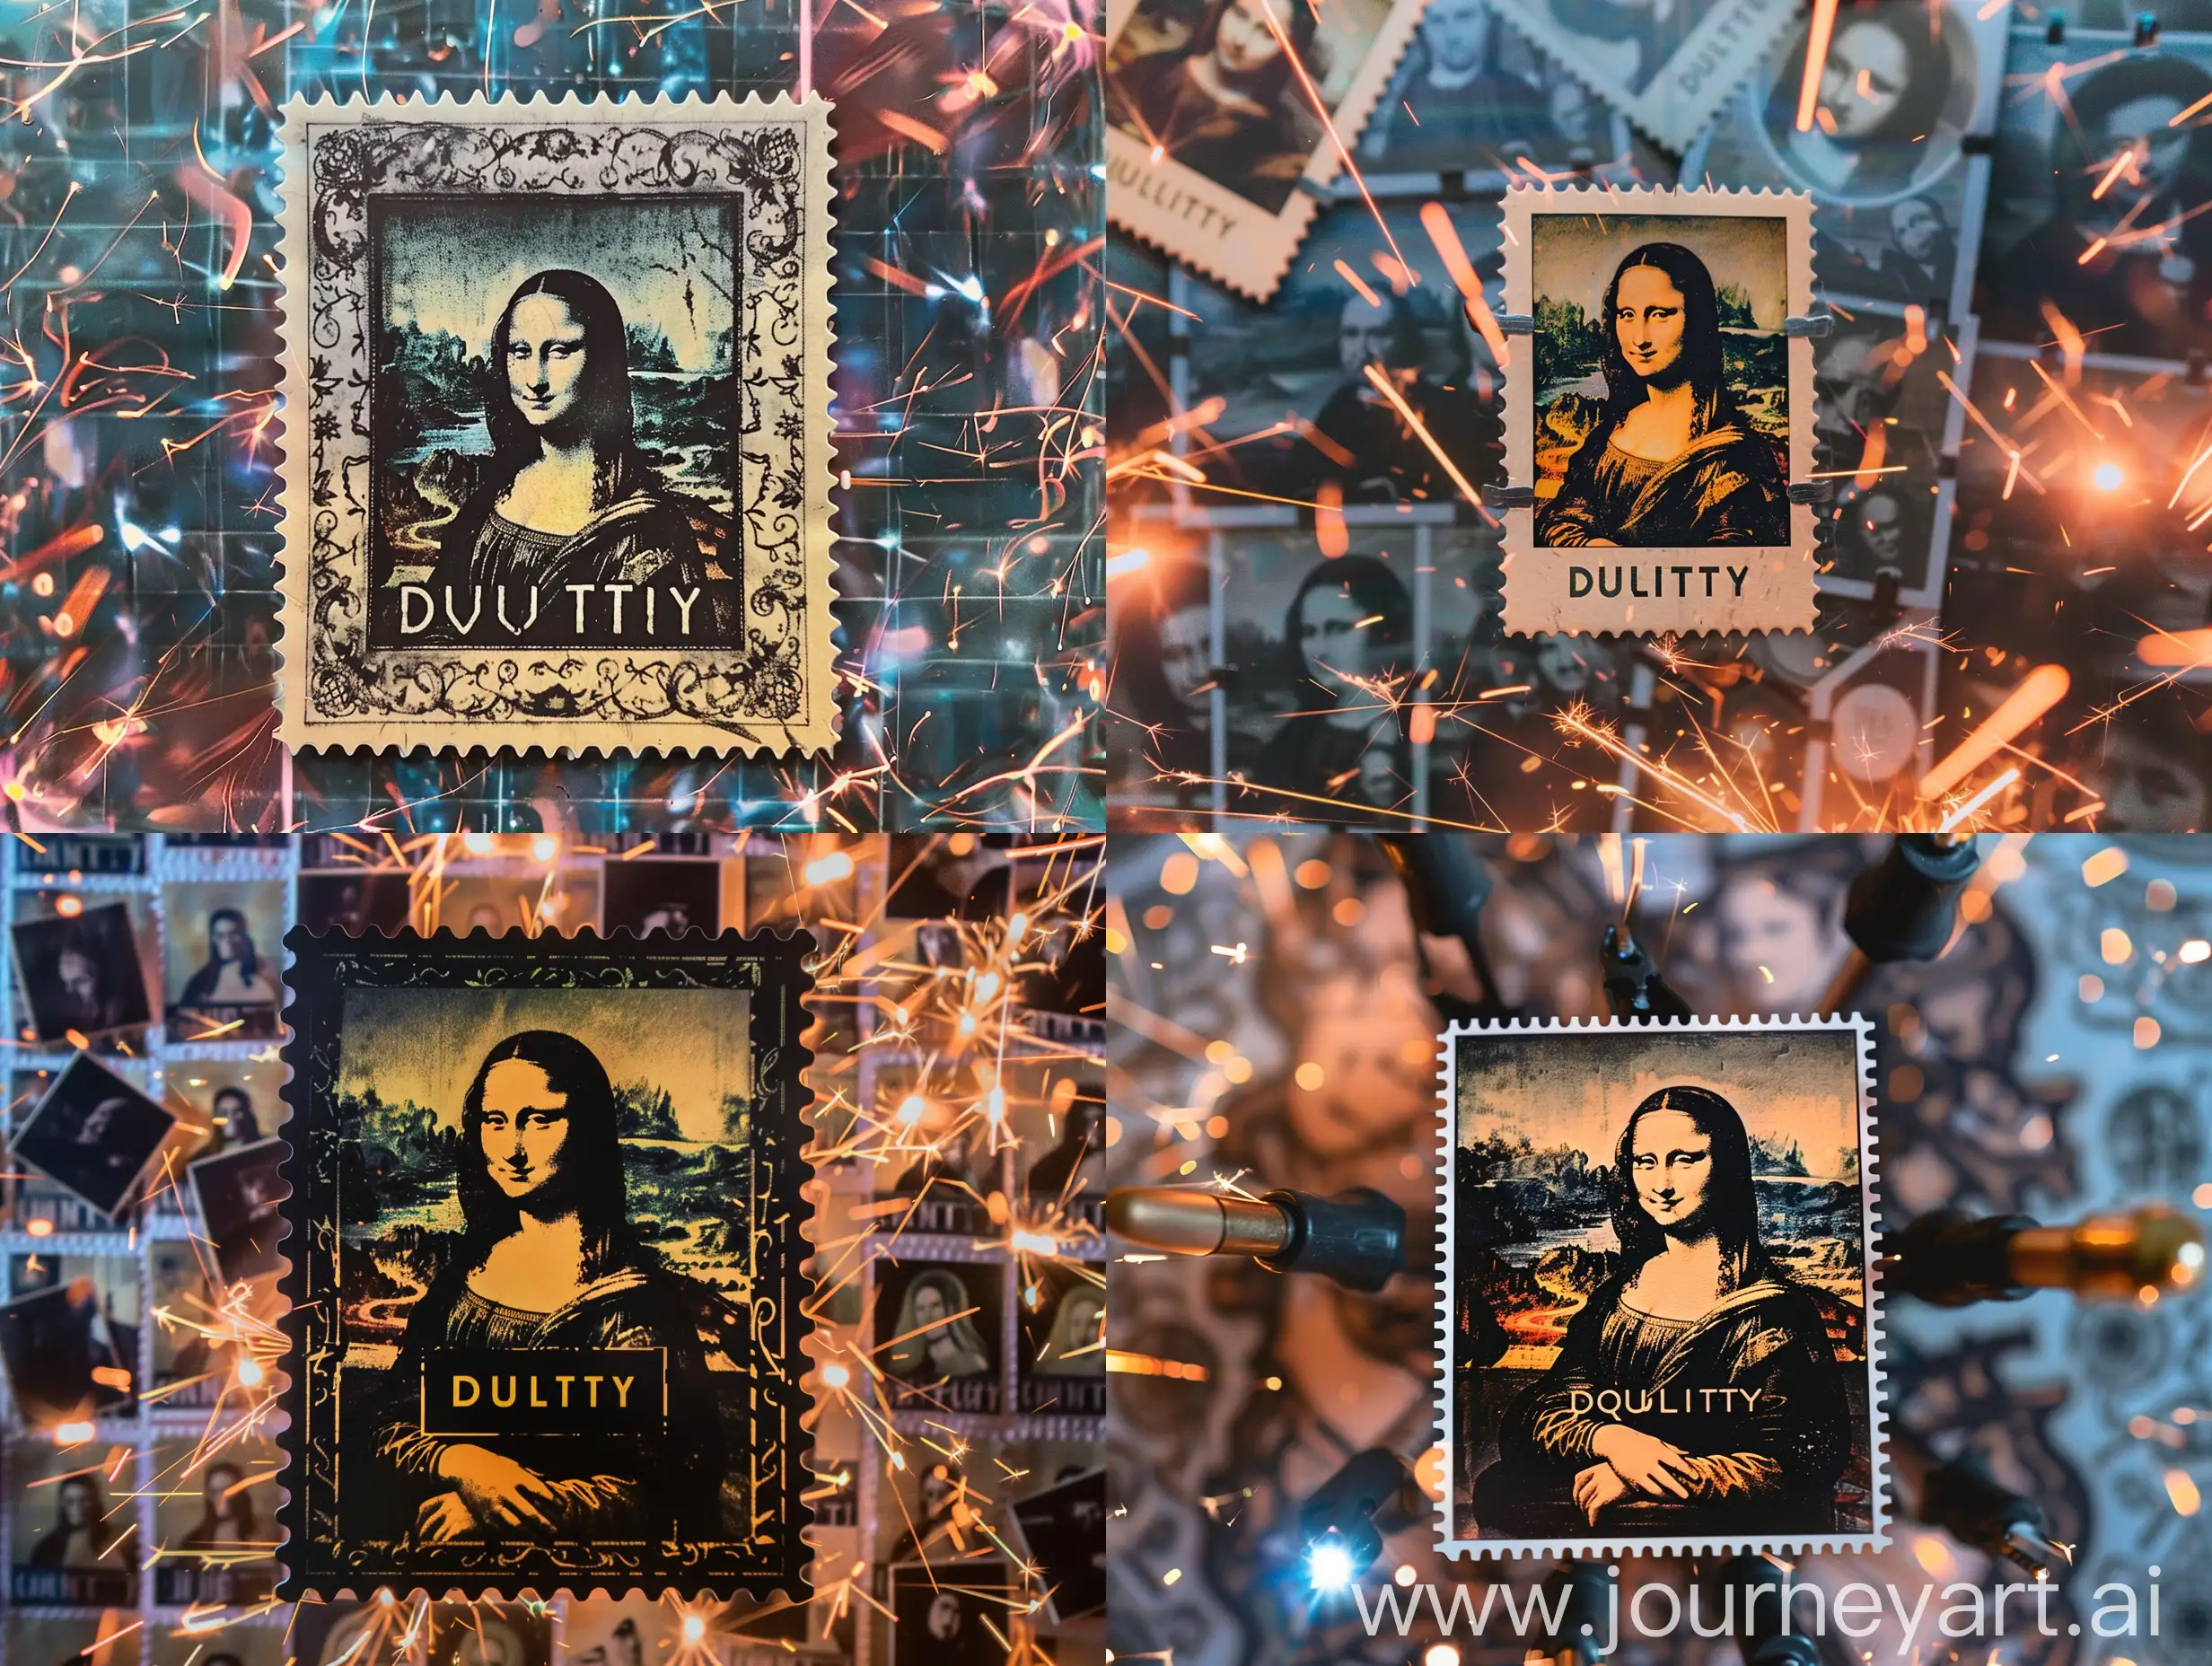 Mona-Lisa-in-WebPunk-Style-with-DUALITY-Stamp-and-Electric-Sparks